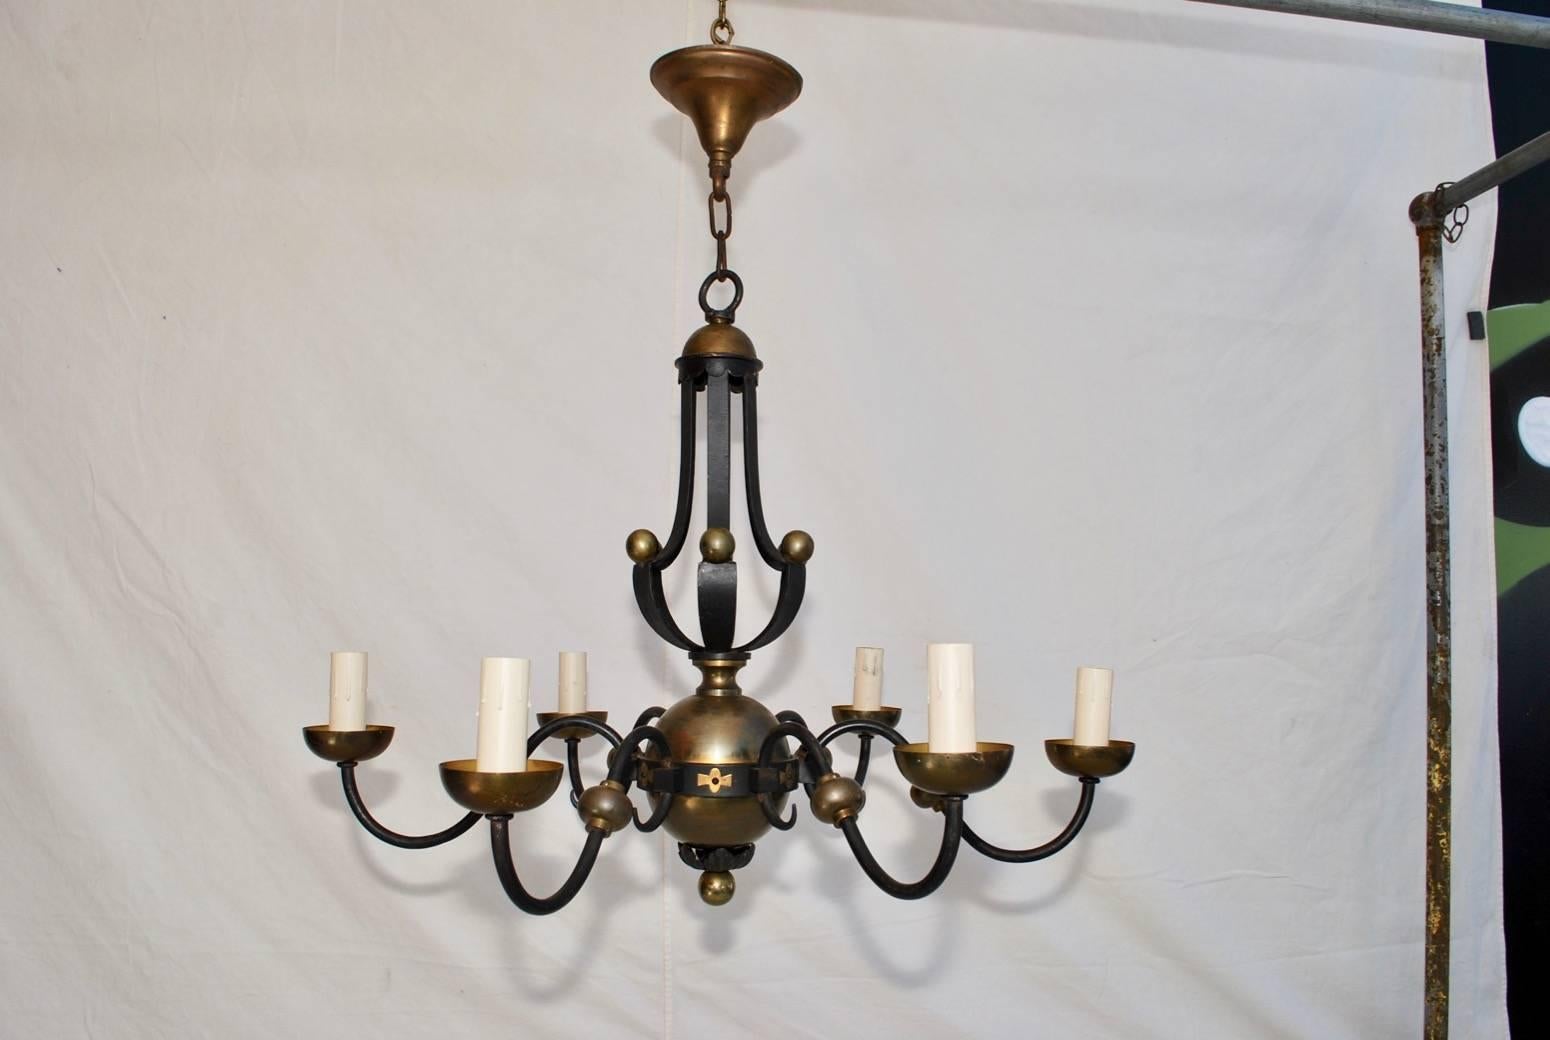 Forged Rare French 1940s Wrought Iron Chandelier Attributed to Gilbert Poillerat